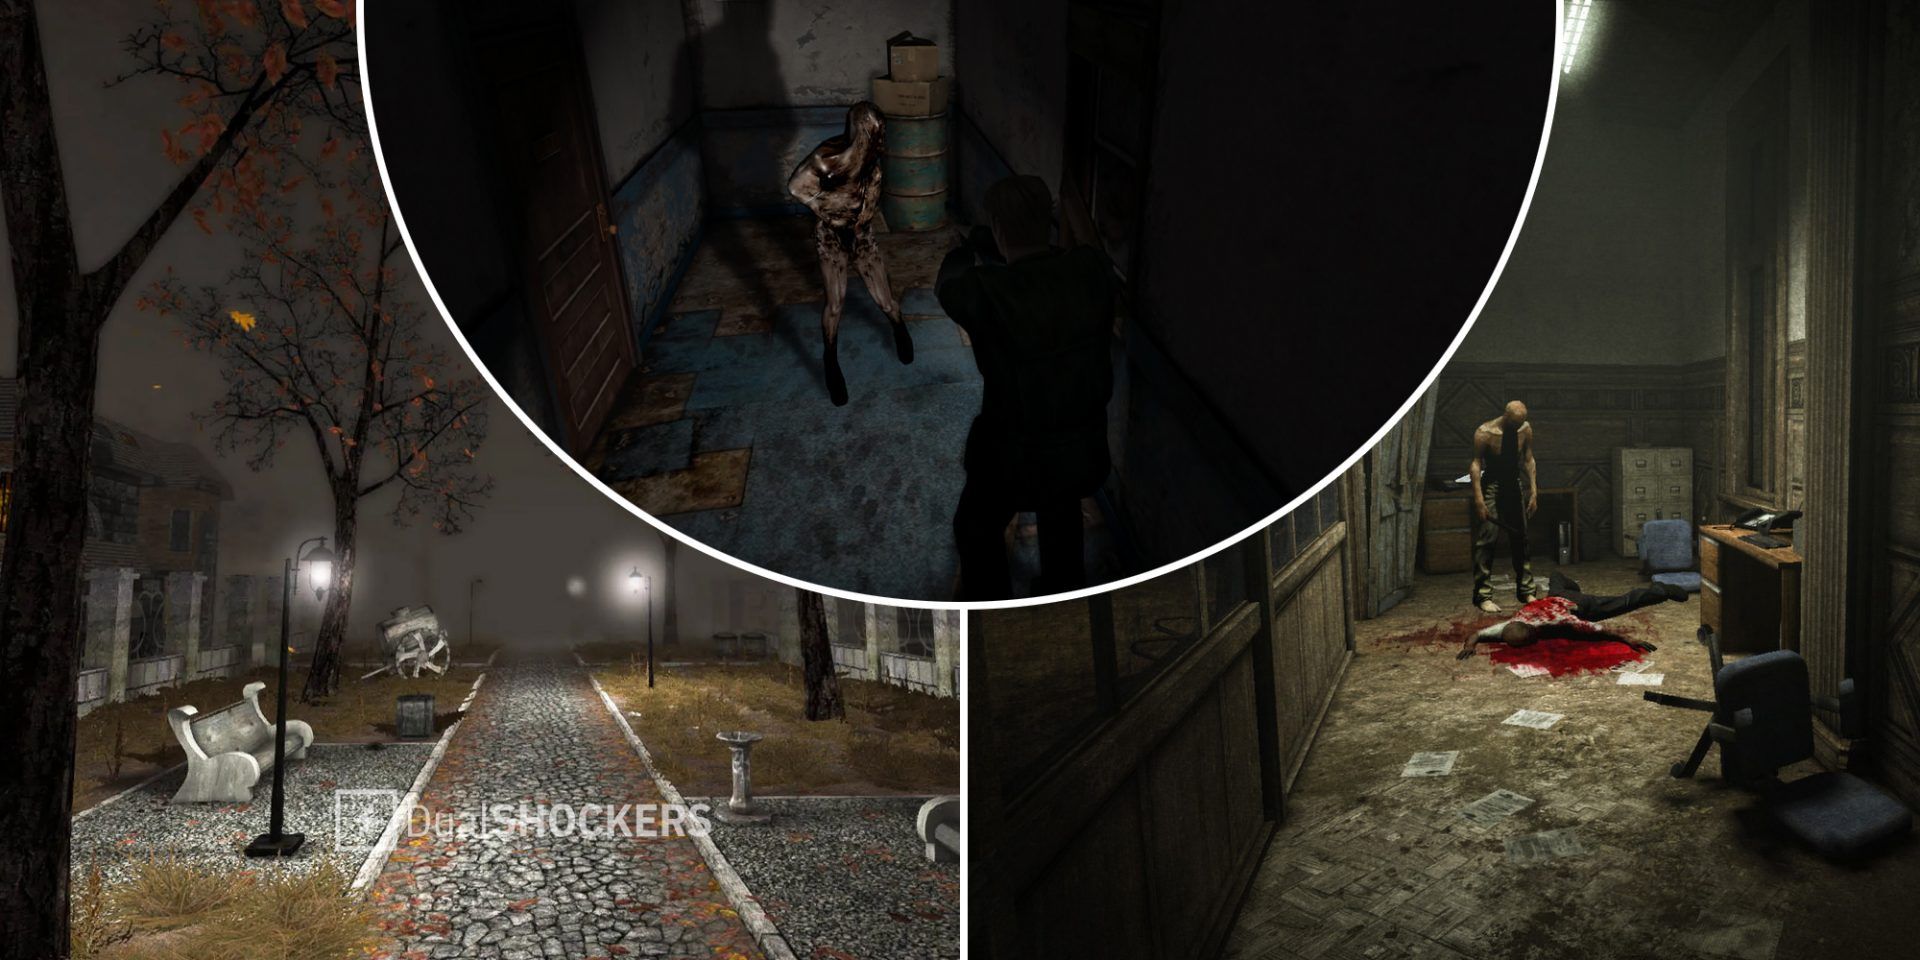 Pathologic on left, Silent Hill 2 in middle, Outlast on right